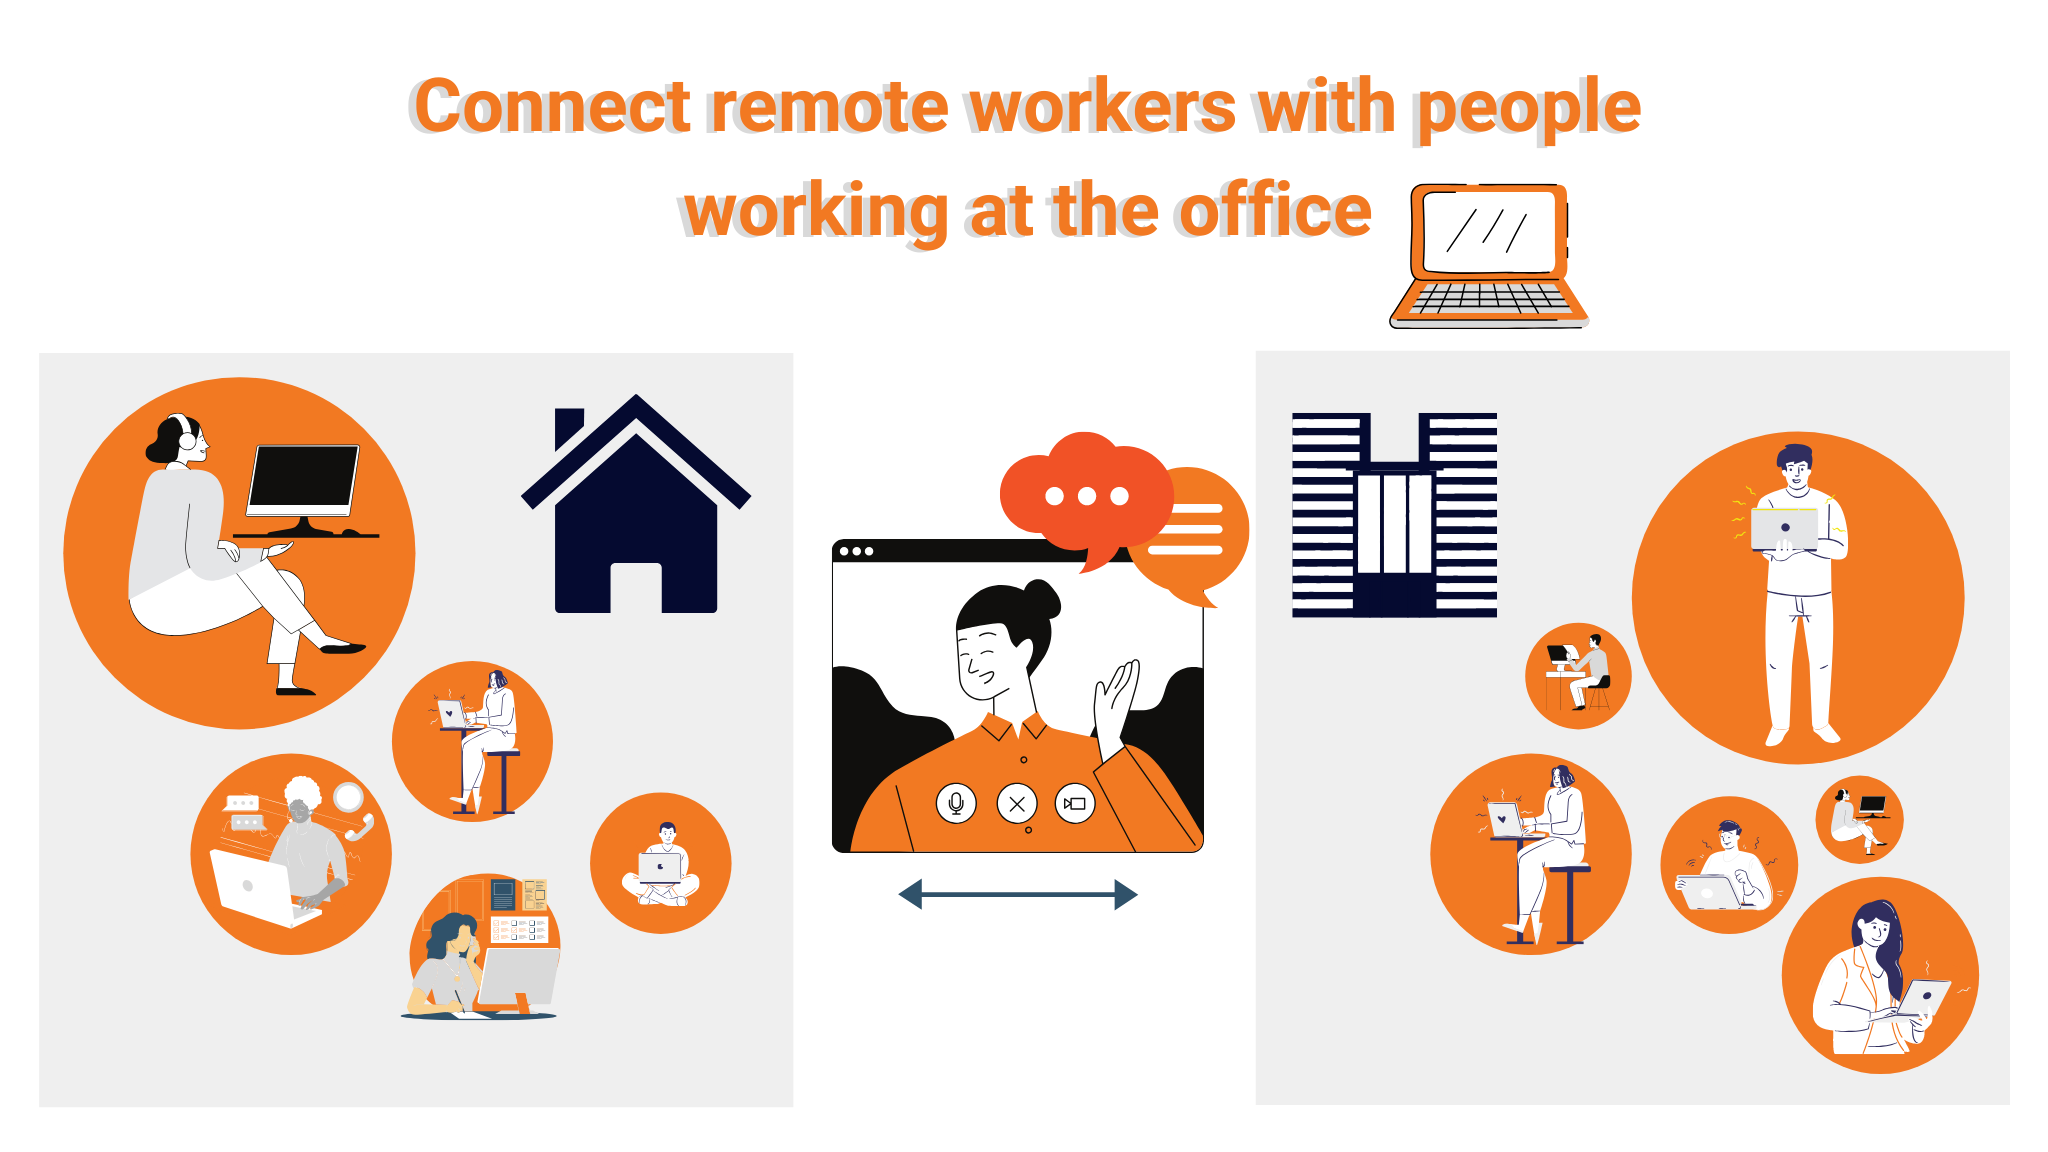 Connect remote workers with people working at the office